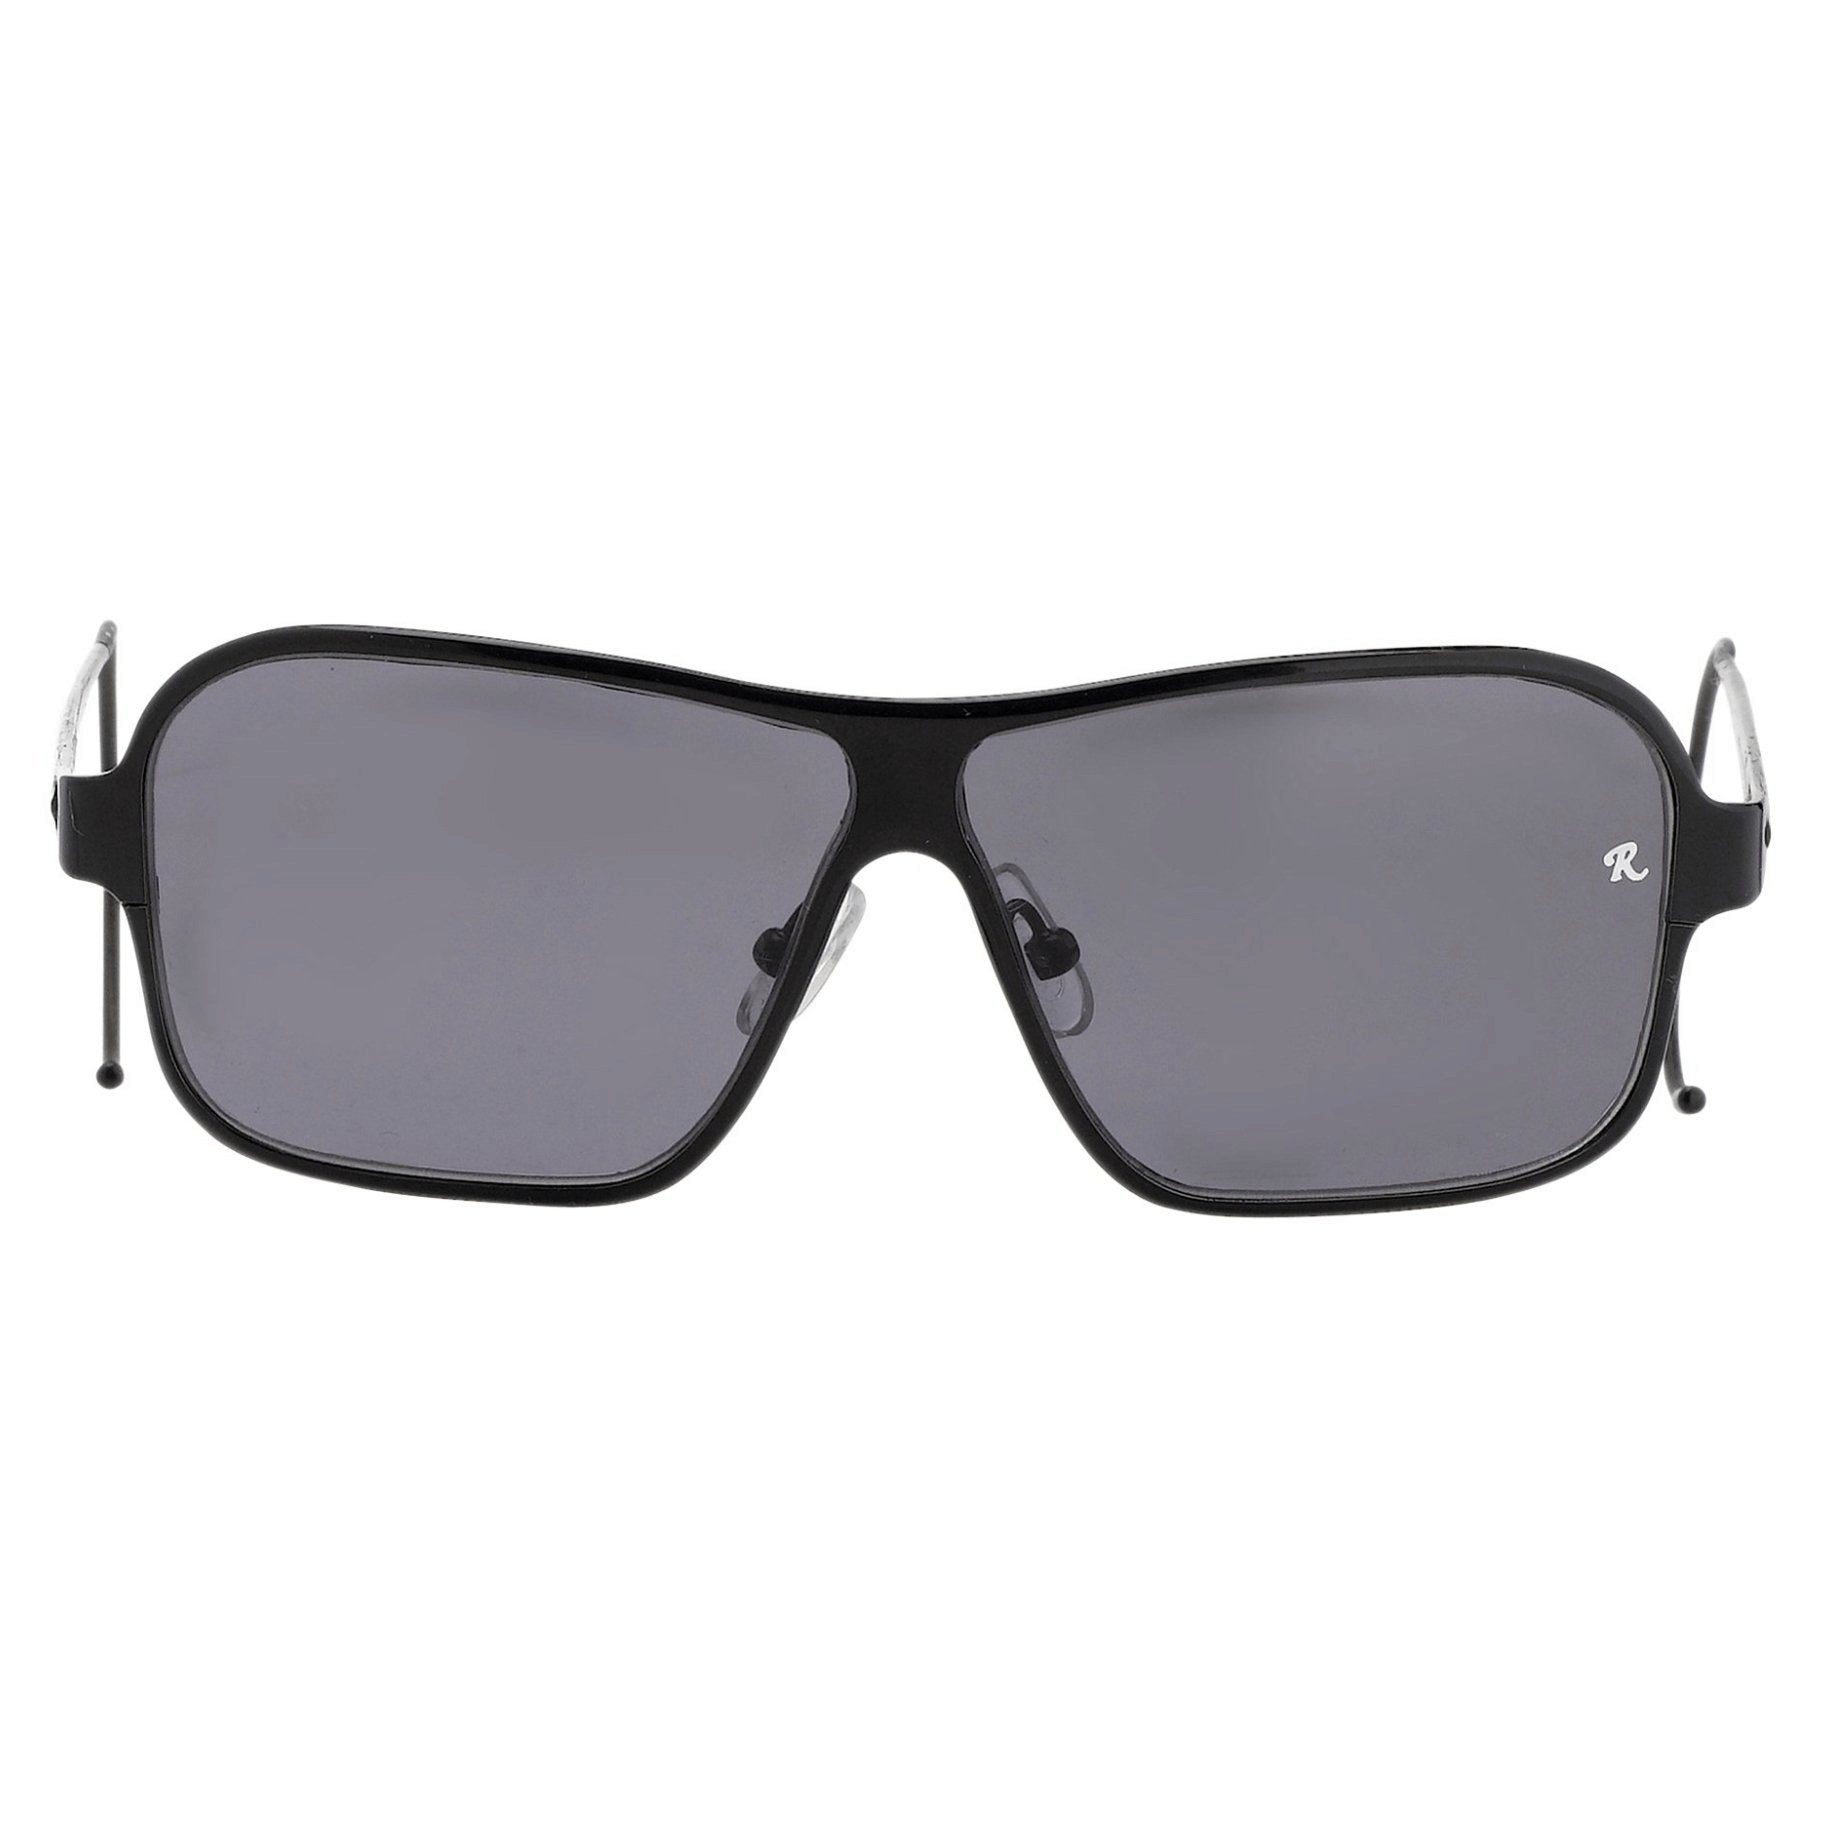 Raf Simons Sunglasses Size Extra Small Rectangular Black and Grey - Watches & Crystals